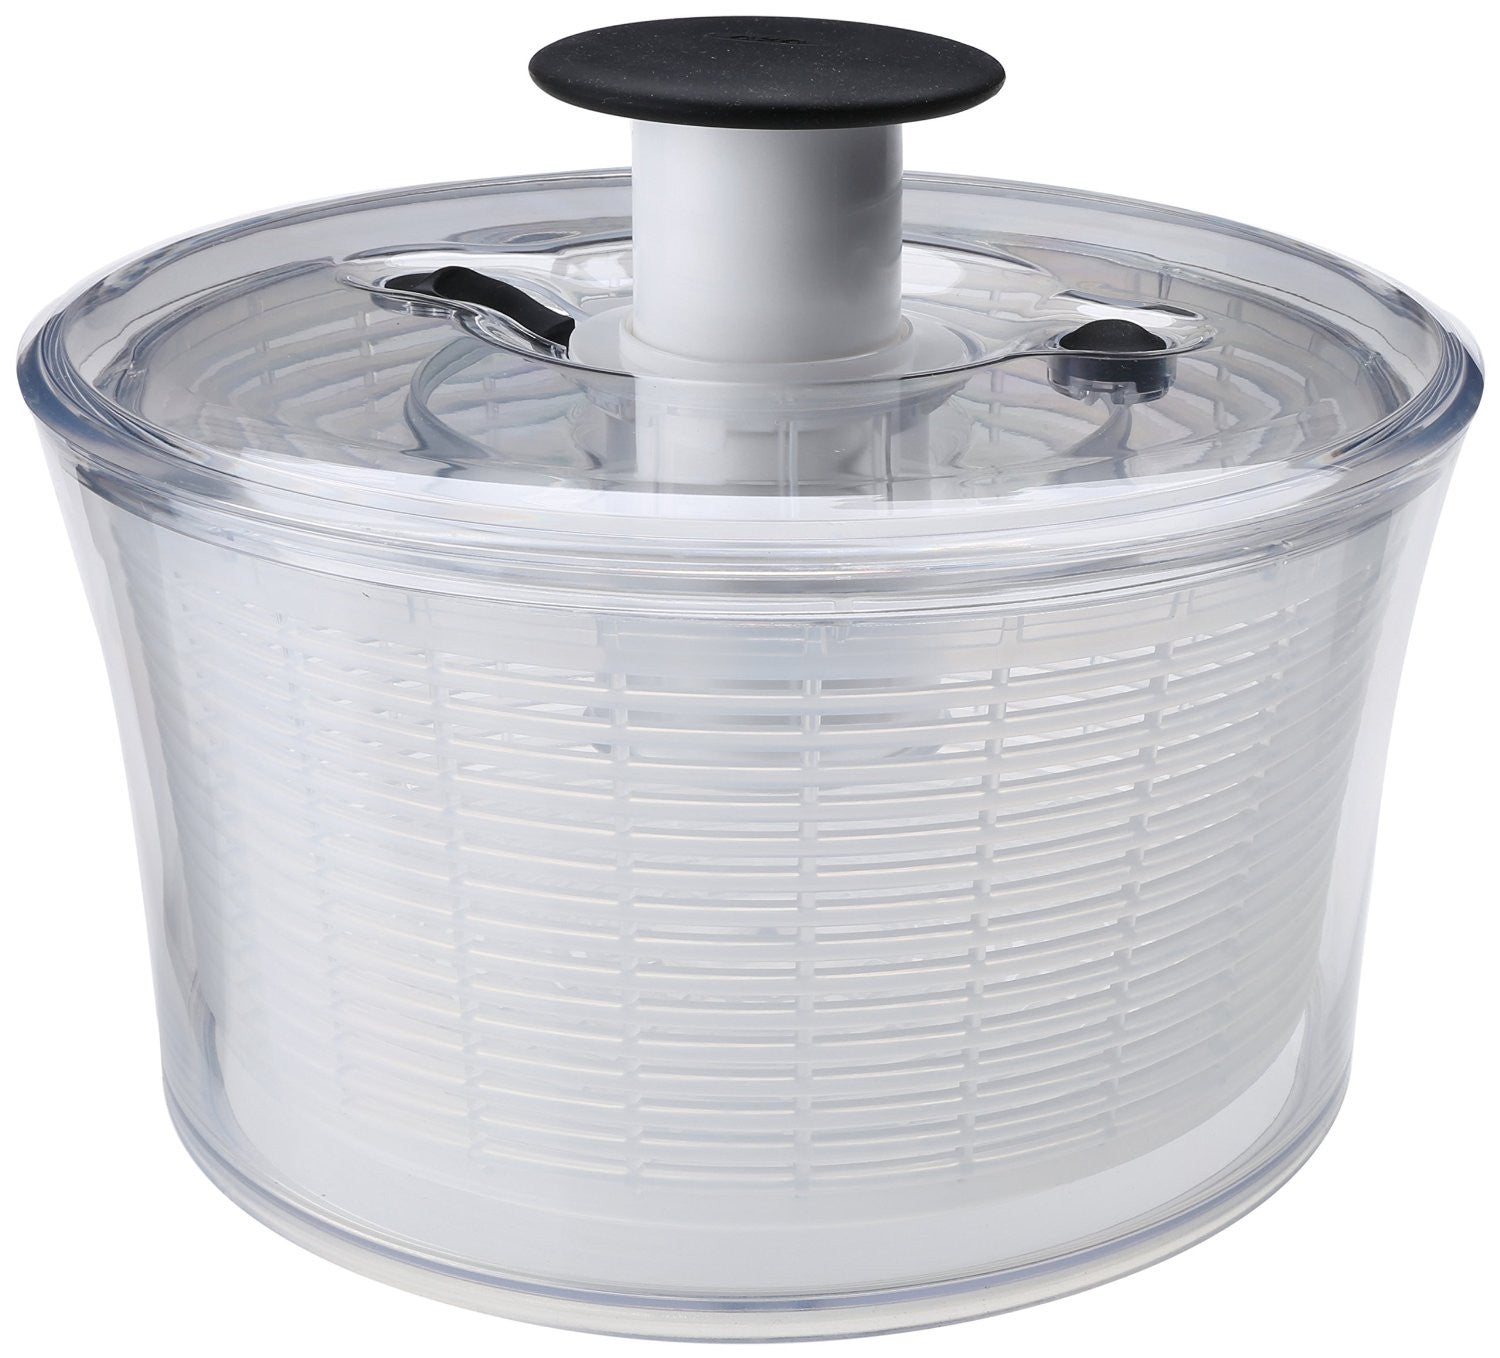 Stainless Steel OXO Salad Spinner Tools Kitchen Salad Spinner